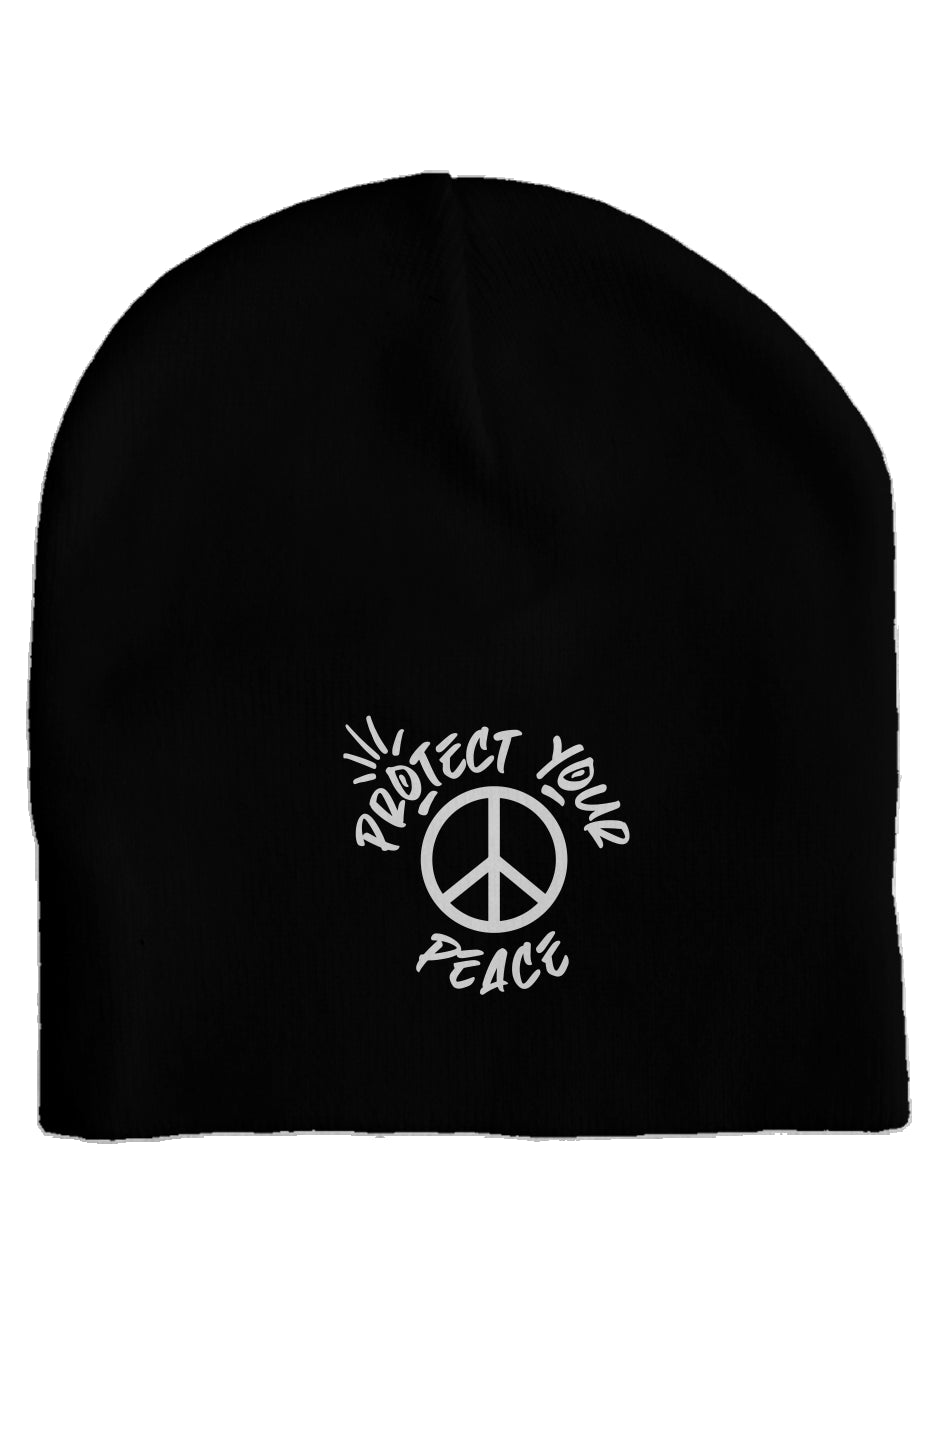 Stylish 'Protect Your Peace' black beanie from Tribe of Weirdos, combining cozy knit fabric with a powerful message of inner serenity and mindfulness.